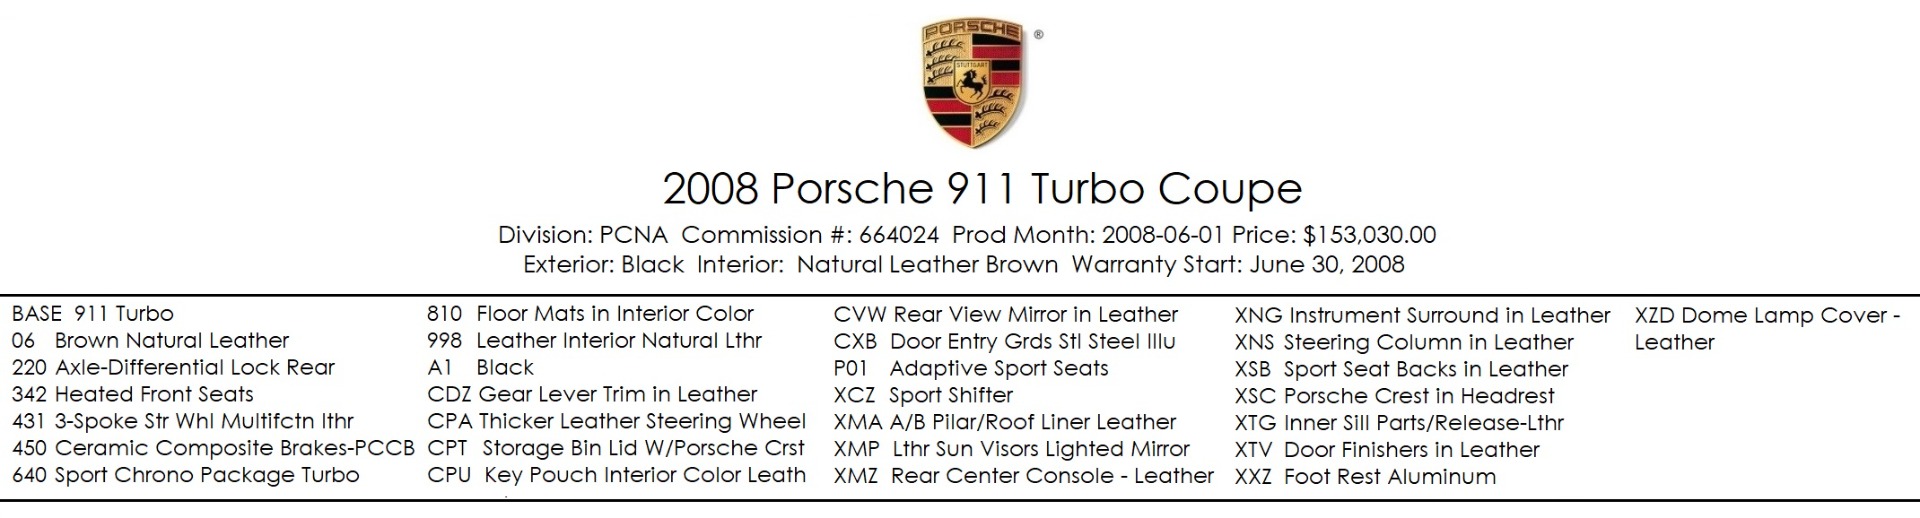 Car cover, for internal use, colored Porsche crest and black lettering